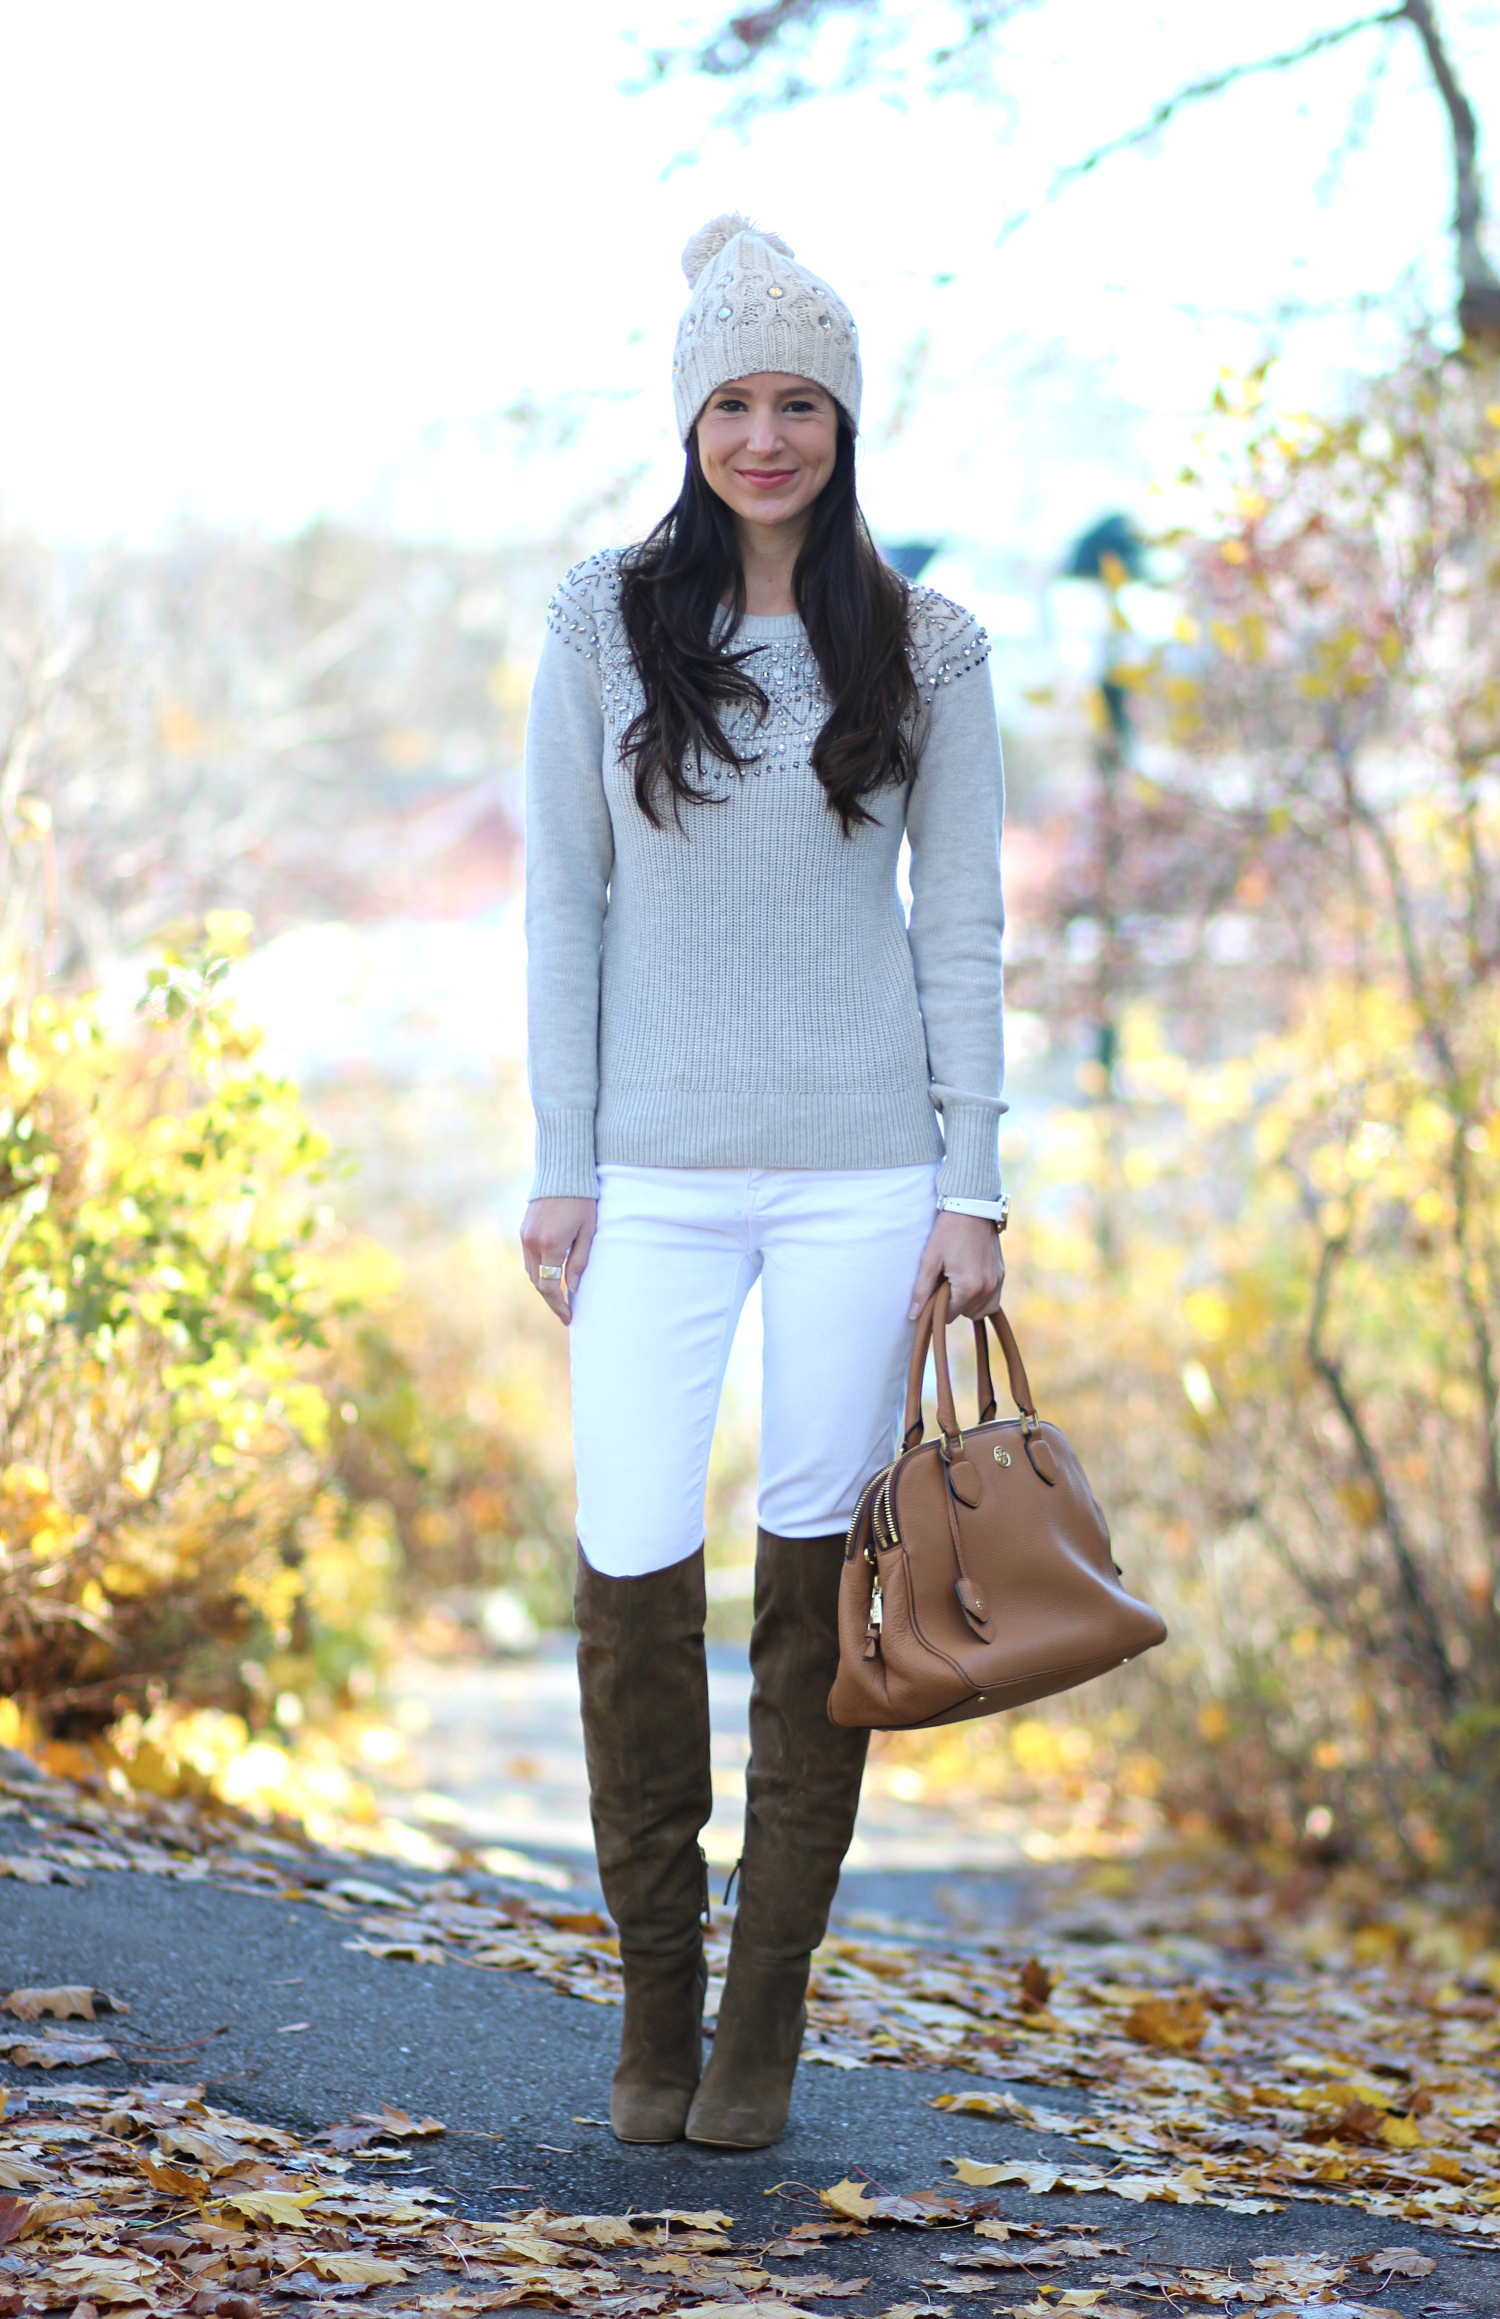 Festive and classy sweater outfit from Banana Republic